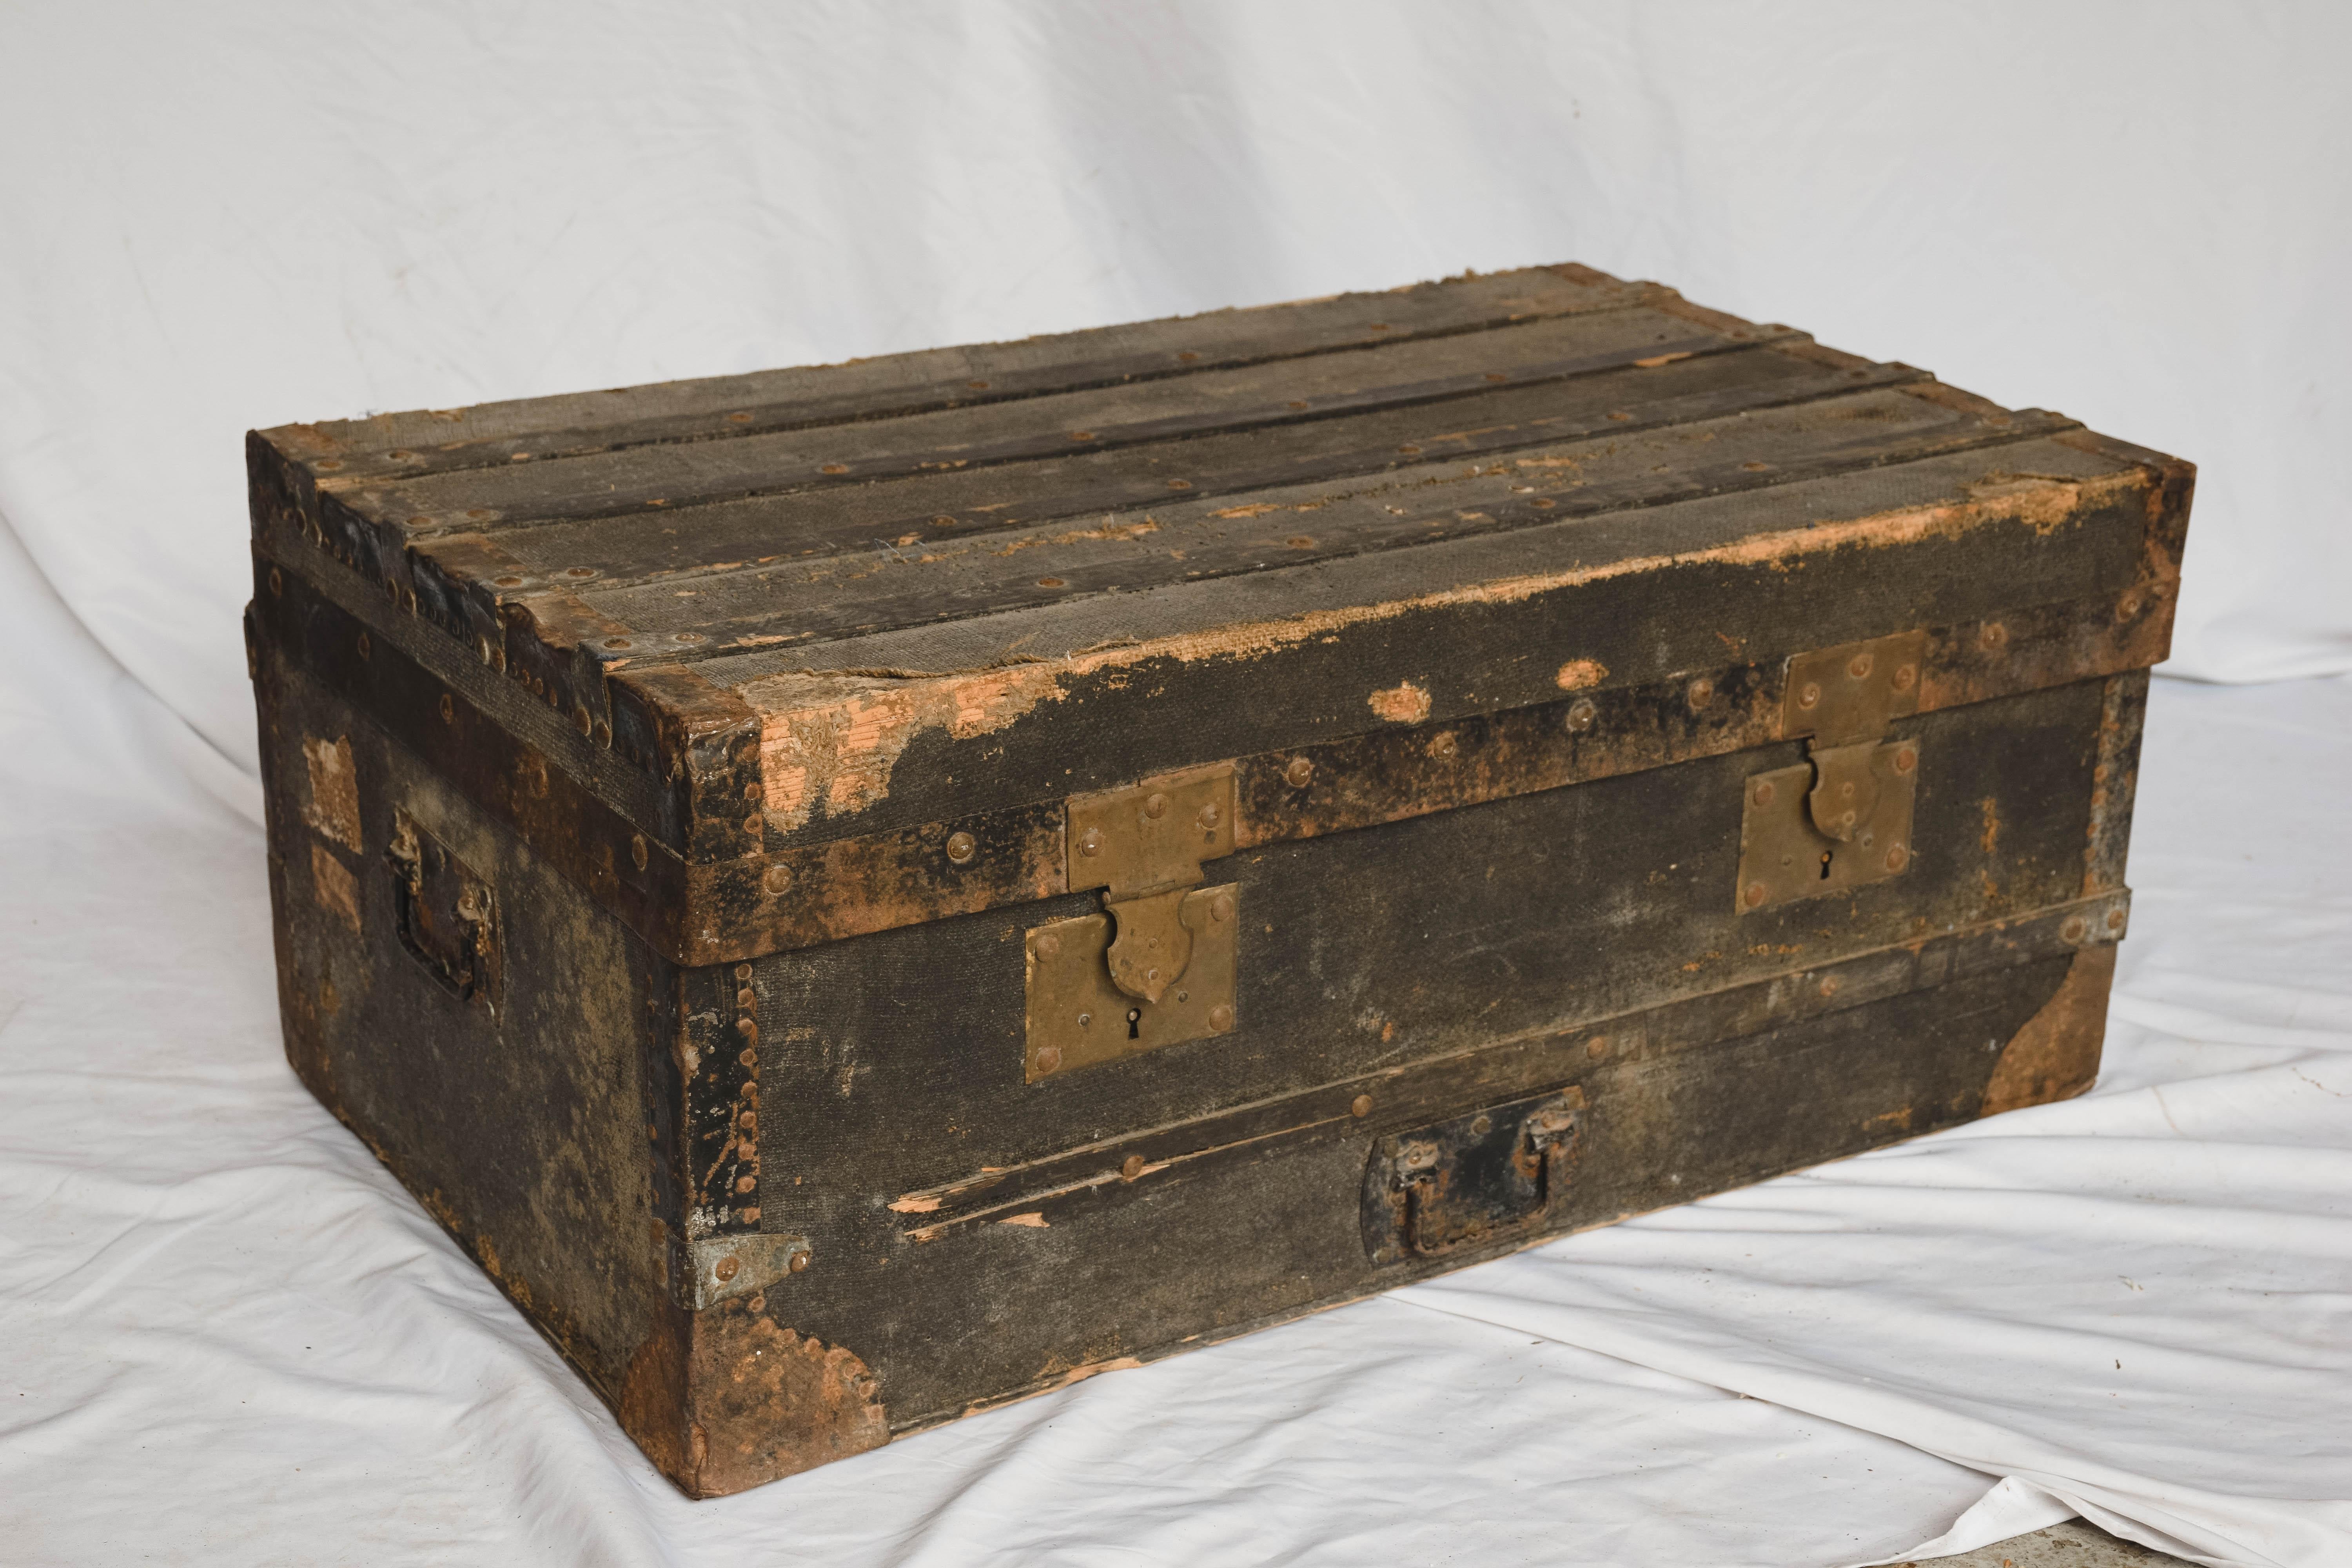 This antique military trunk would be an interesting addition for many settings. It could be used as a low coffee table, storage, or just as a conversation piece.